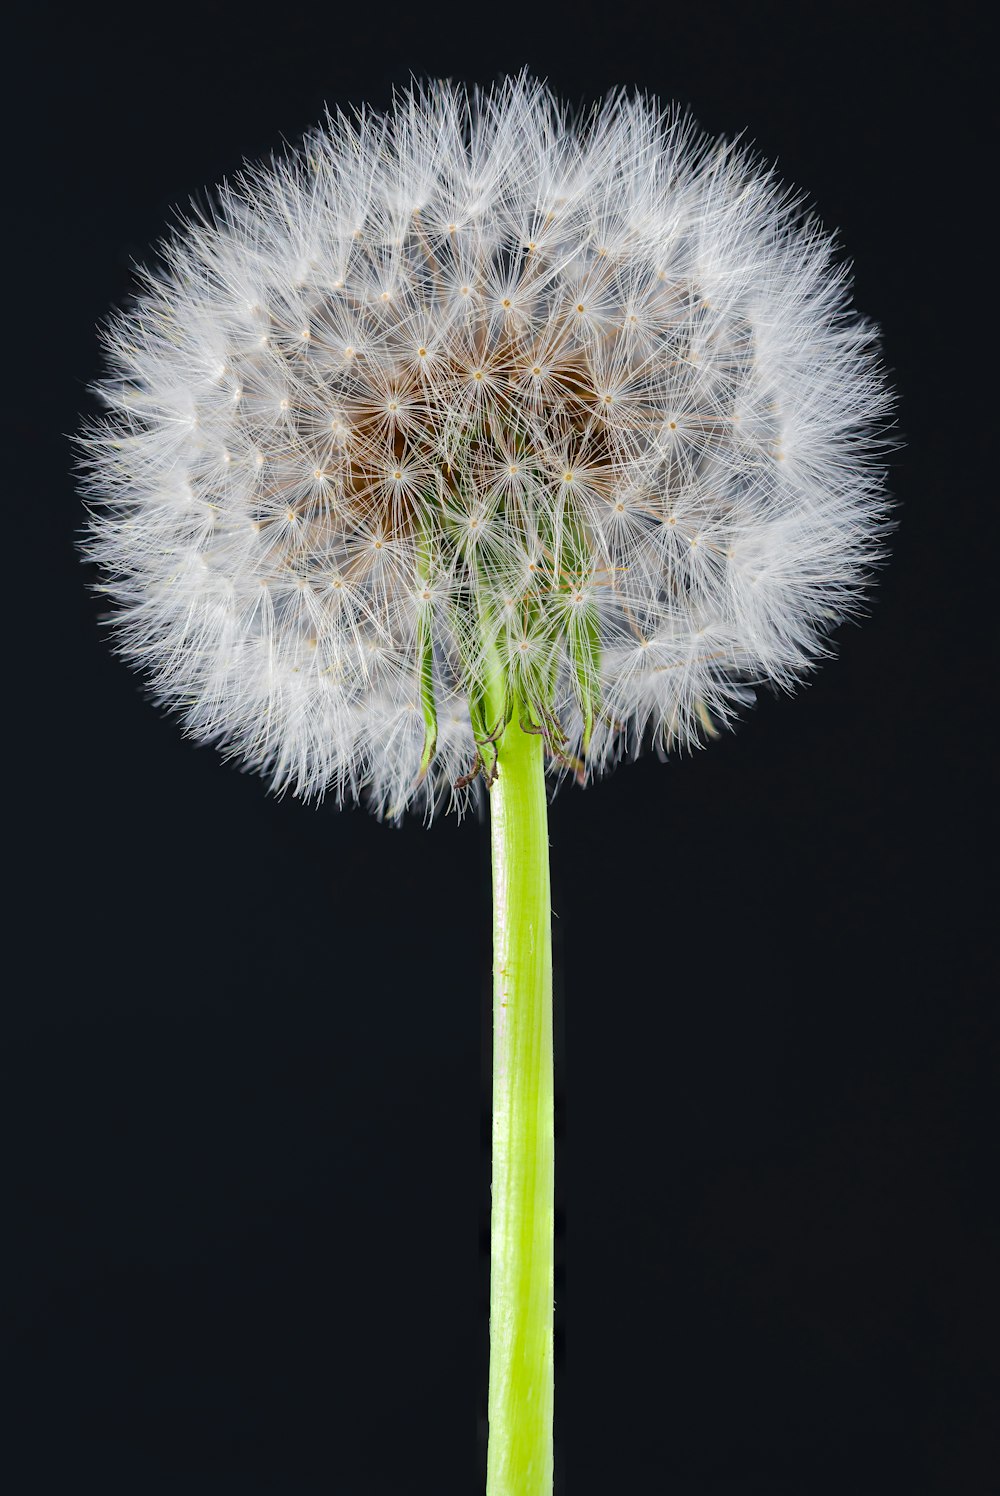 a dandelion is blowing in the wind on a black background